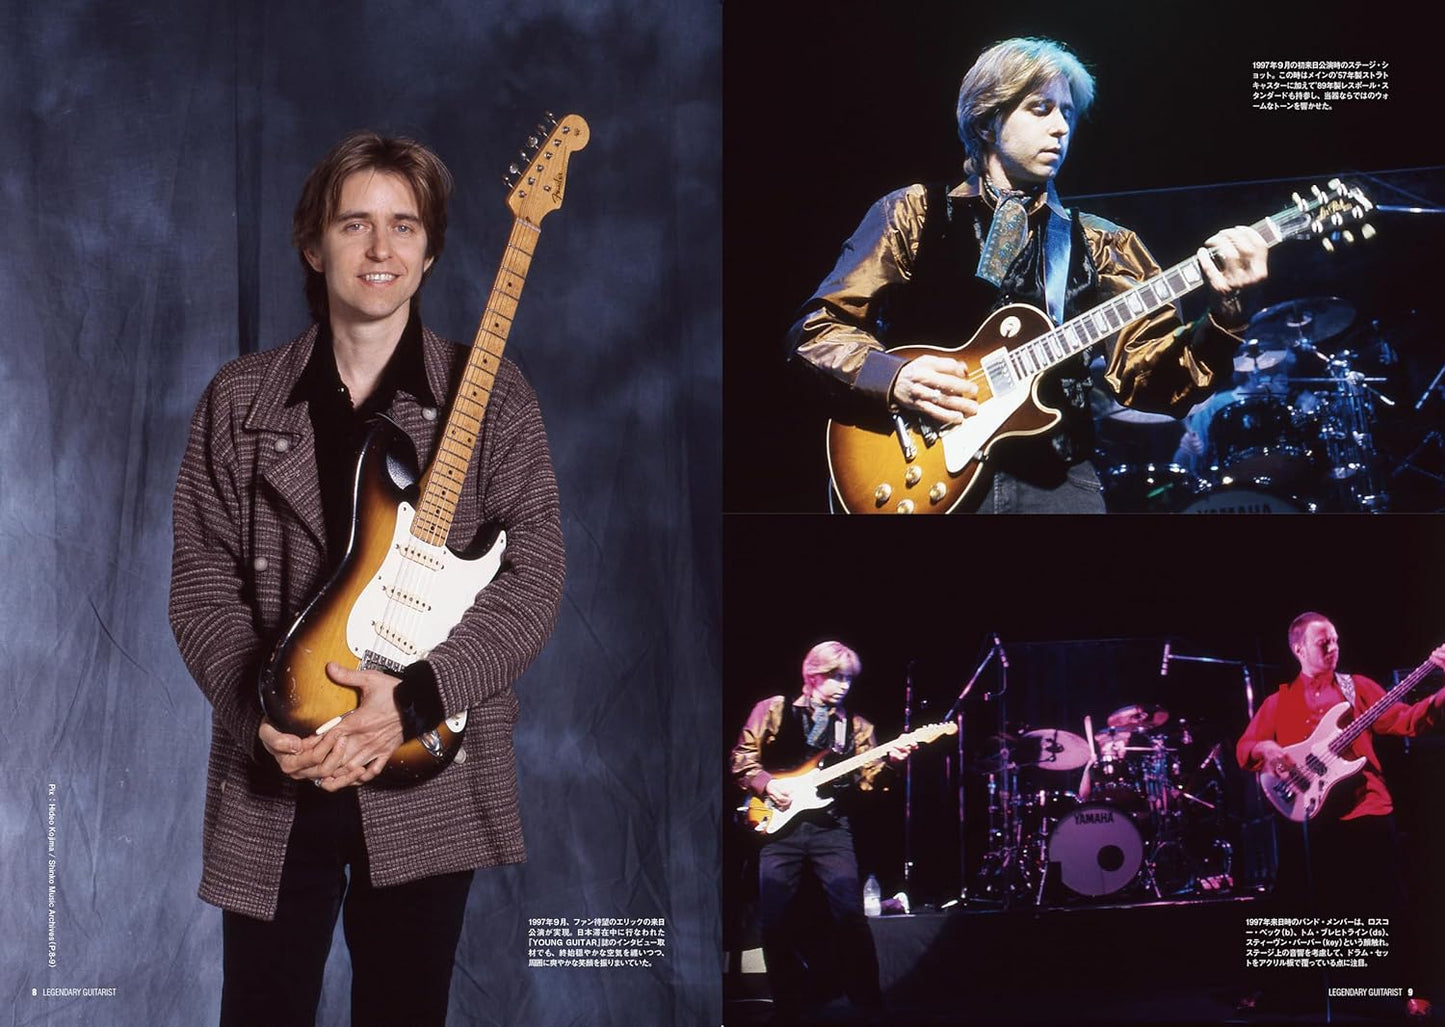 Legendary Guitarist Eric Johnson YOUNG GUITAR SPECIAL ISSUE